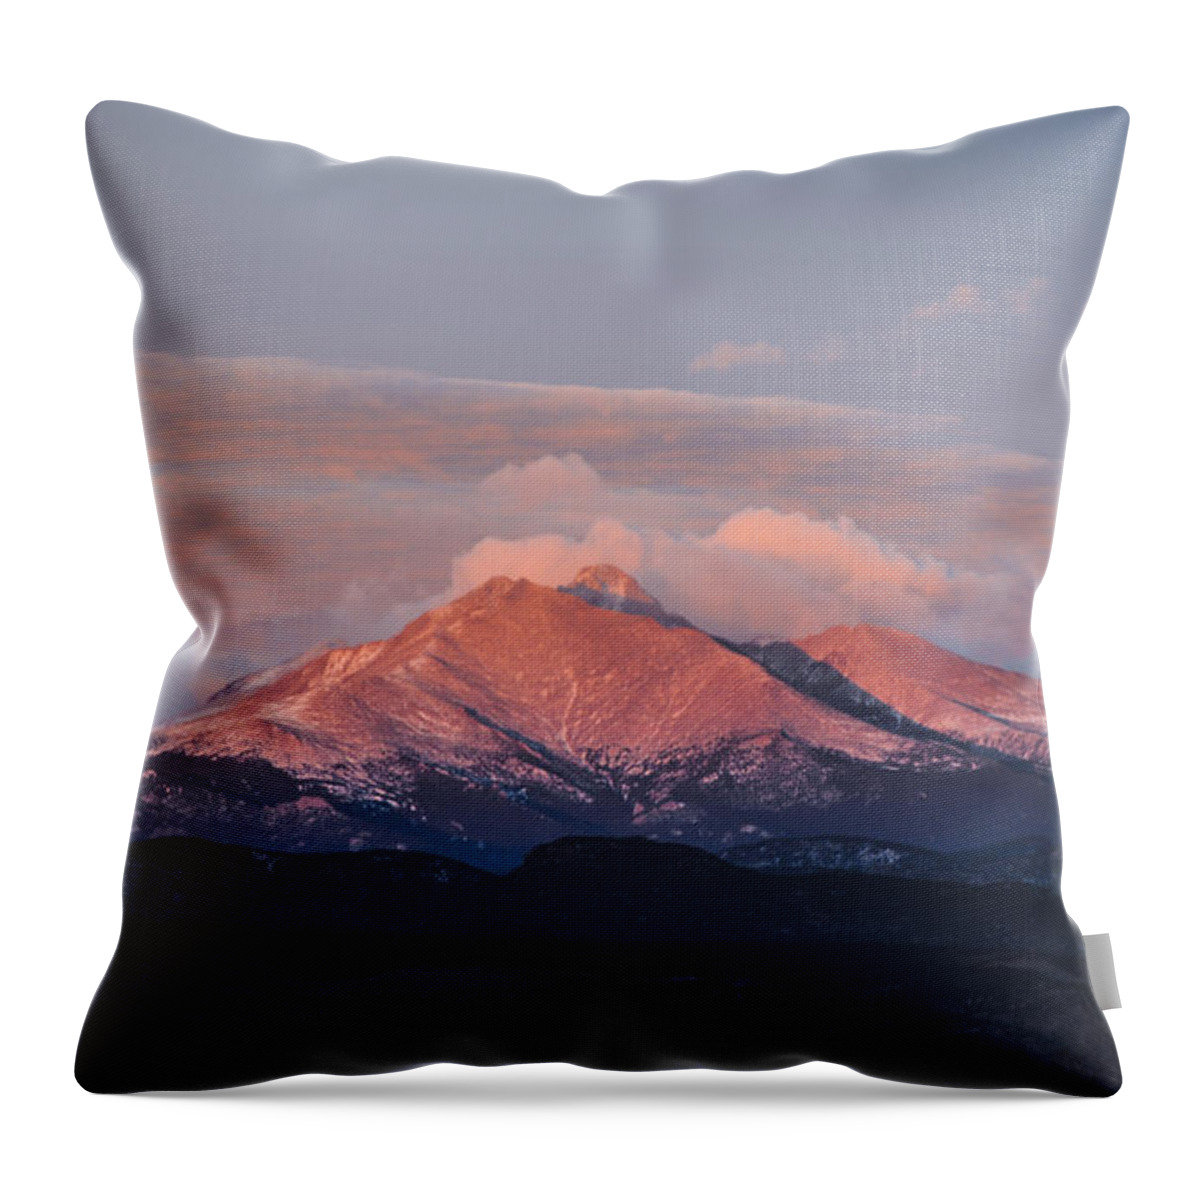 Longs Throw Pillow featuring the photograph Longs Peak Sunrise by Aaron Spong